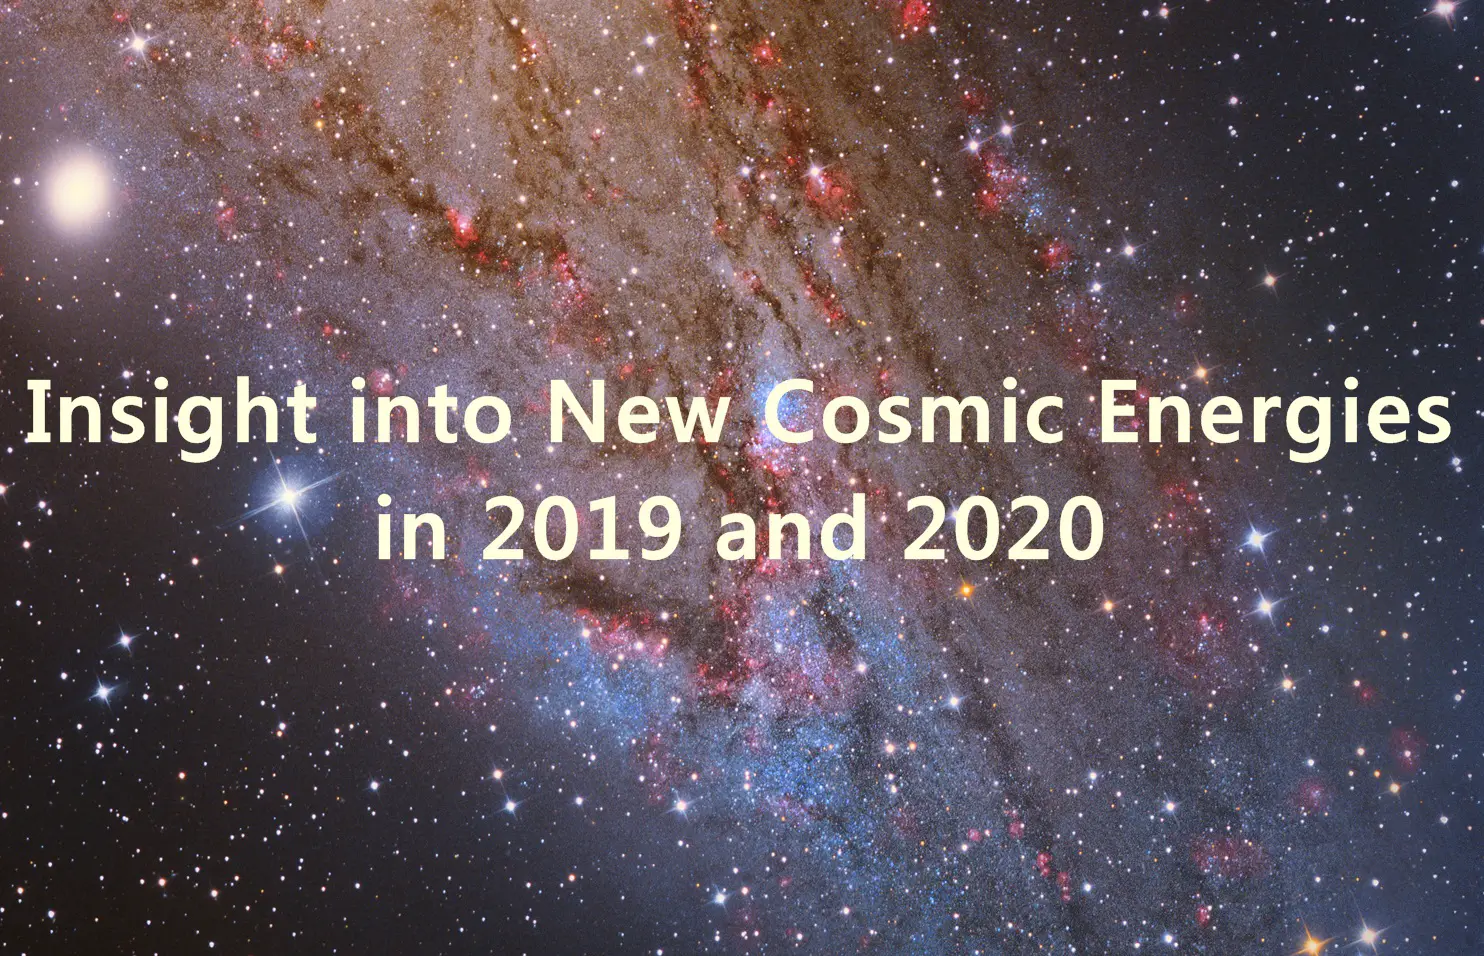 Insight into New Cosmic Energies in 2019 and 2020